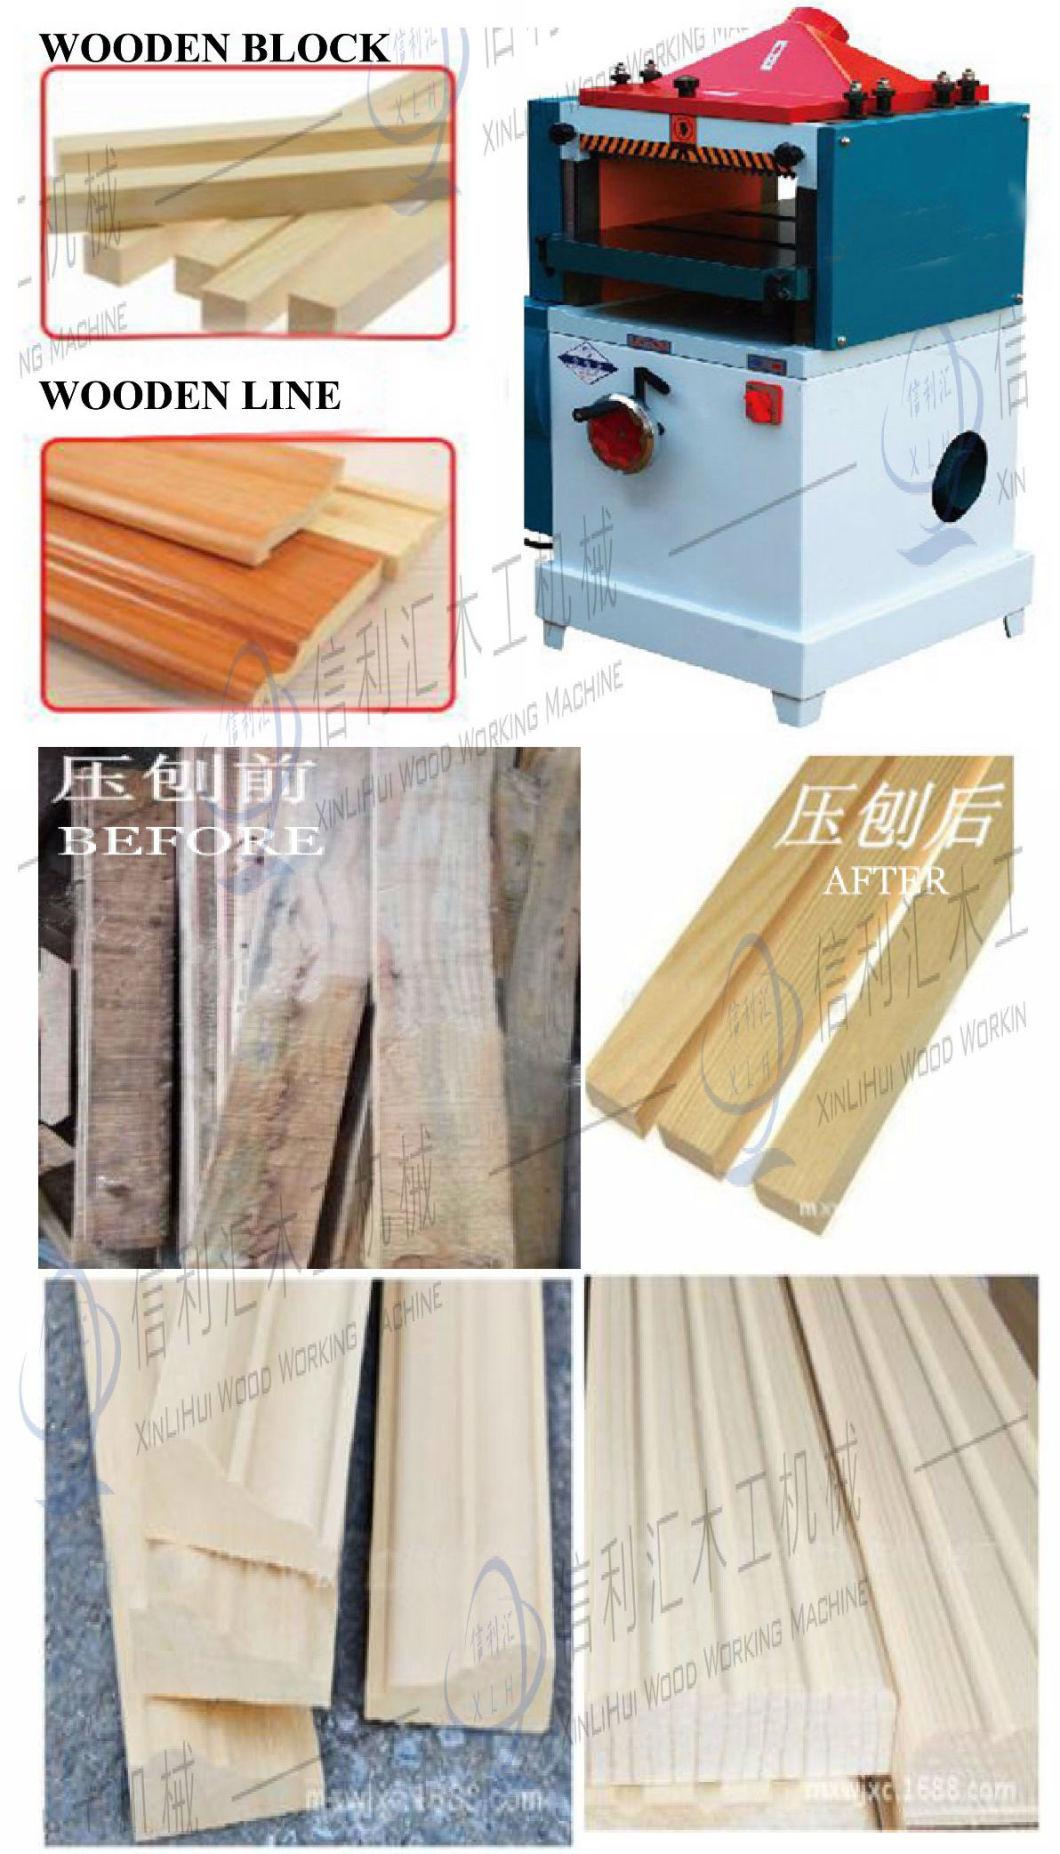 Wood Grinder Solid Woodworking Surface Planer and Thickness, Hot Sale Thickness Planer Chinese Homemade Woodworking Machine Pialla a Filo Doppio